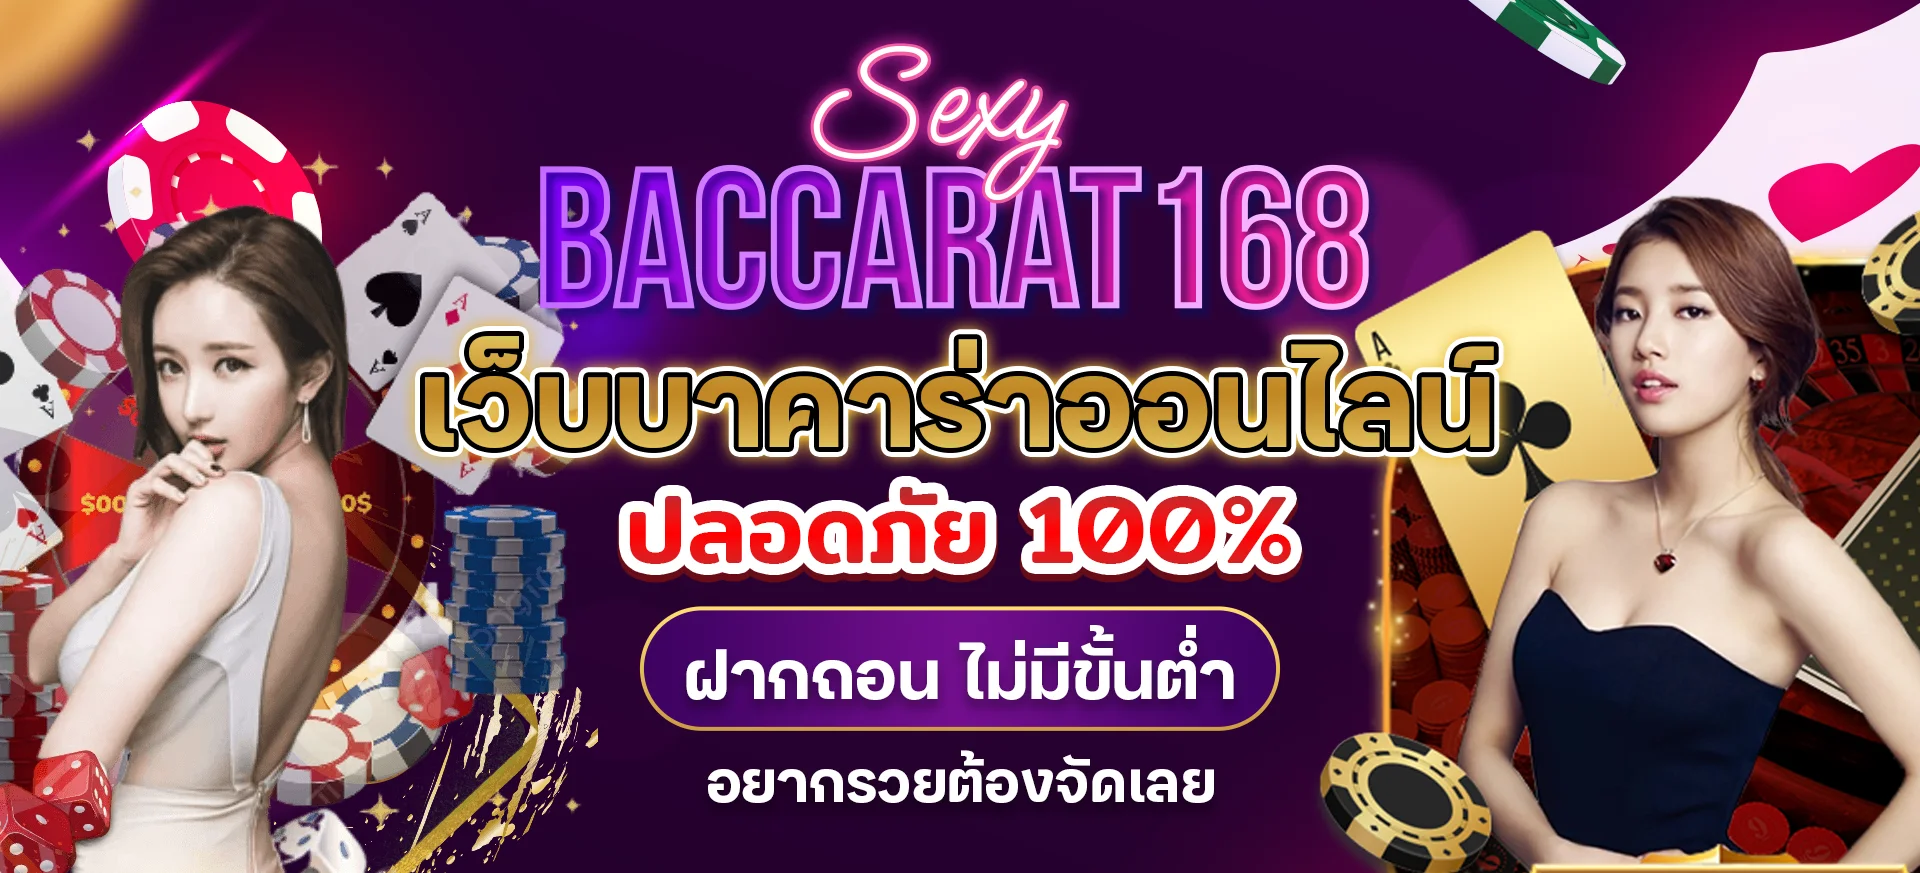 SEXYBACCARAT168